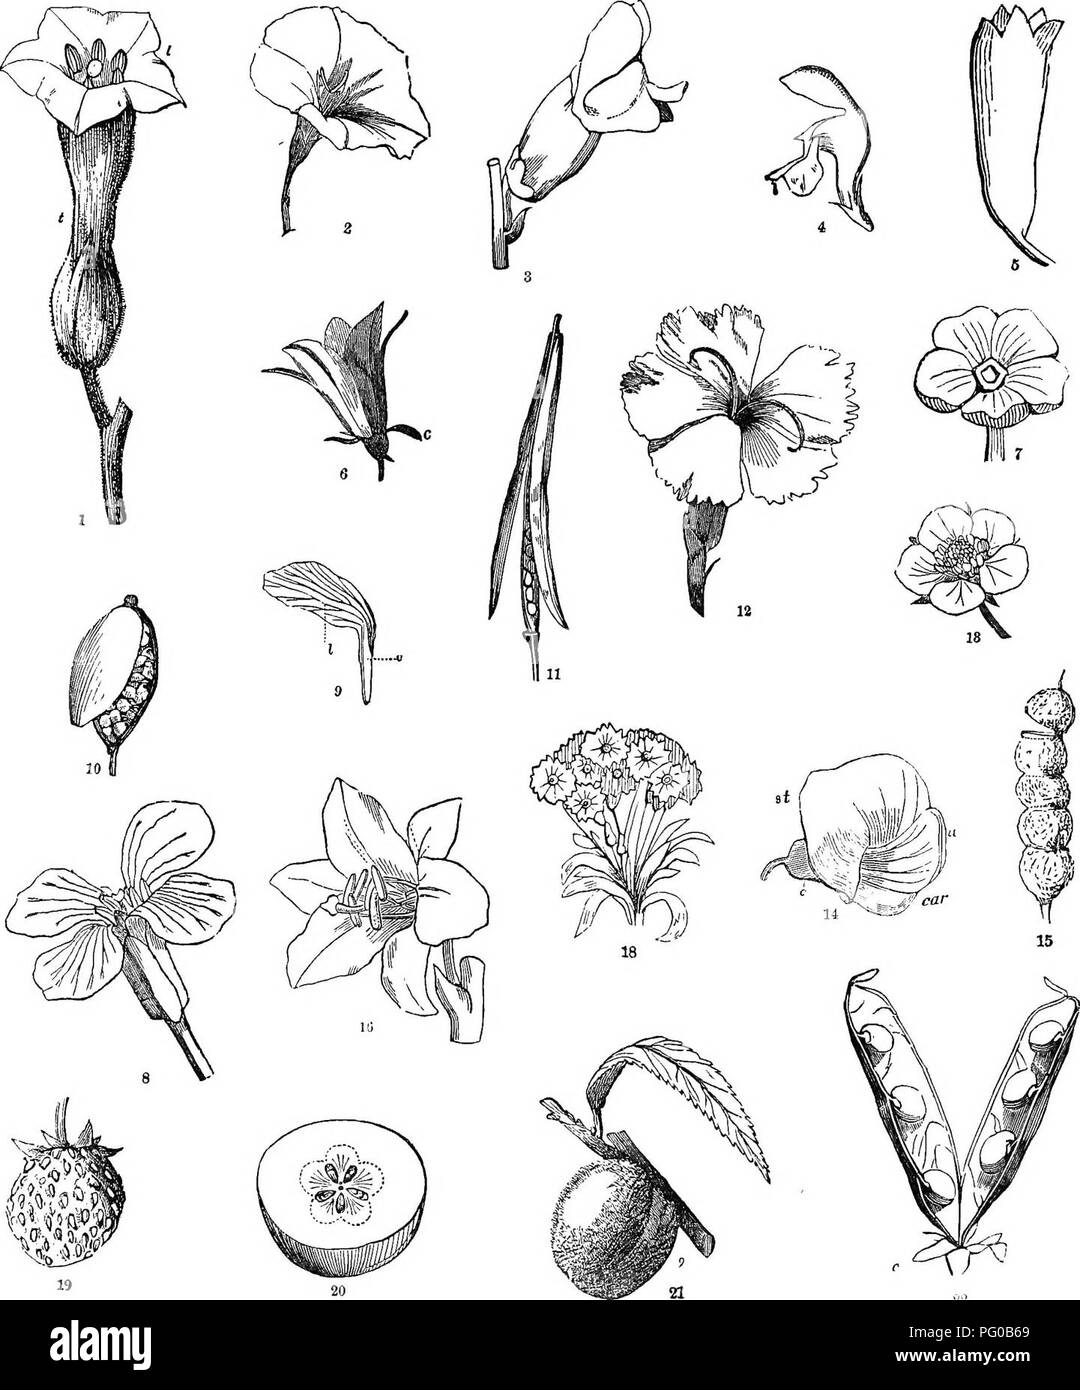 . Analytical class-book of botany : designed for academies and private students. Plants. 70 THE COROLLA Plate XXIII. General subject. Name each figure. Which of these forms are Monopeta- lou-s—Polypetalous ? Point out the parts in figs. 1, 2, and 6. Parts of fig. 9. Wliat kind of Corolla at fig. 8 ? By what fruits accompanied—what Order does t mark—from what circumstance ? What kind of Corolla at fig. 13—what are some of its fruits ? Describe fig. 14. Define its parts—its fralta. How does fig. 8 differ from 4—fig. 1 from 5? How 1b the limb in the Rotate corolla—the Bell-form—the Fnnnel-form—th Stock Photo